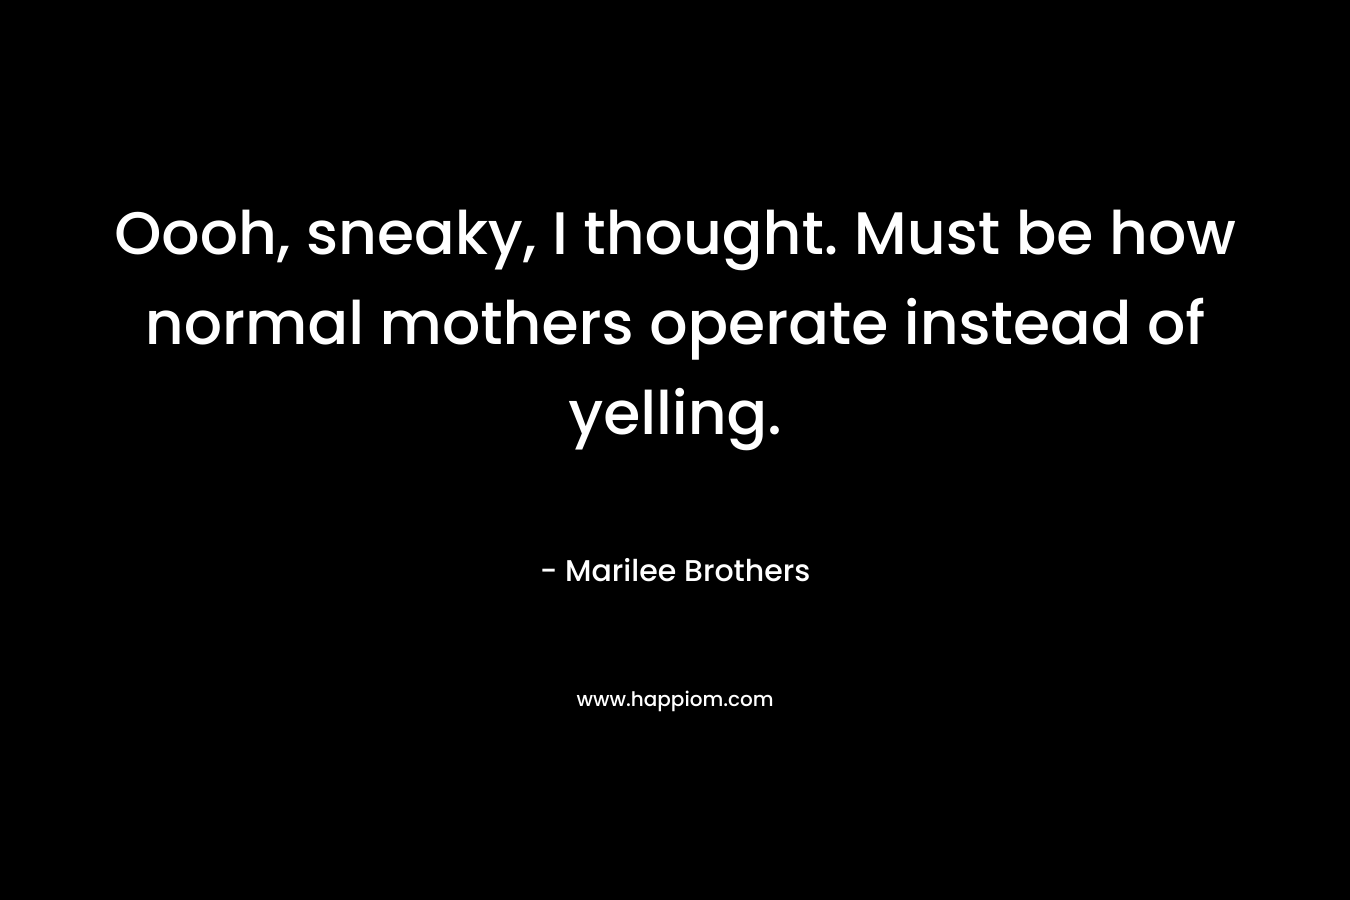 Oooh, sneaky, I thought. Must be how normal mothers operate instead of yelling. – Marilee Brothers